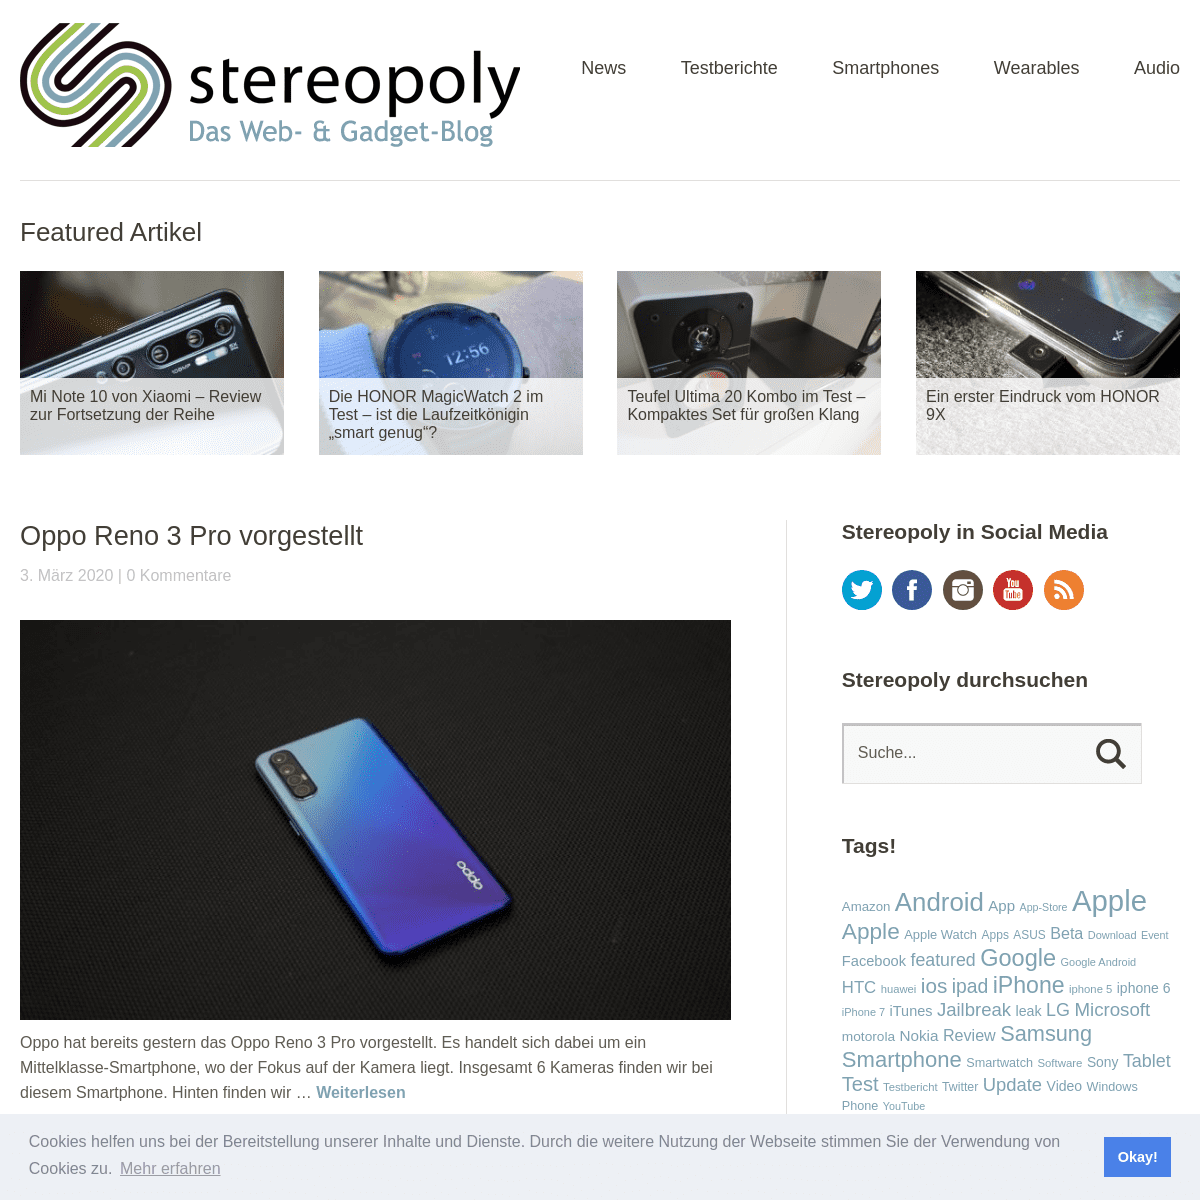 A complete backup of stereopoly.de